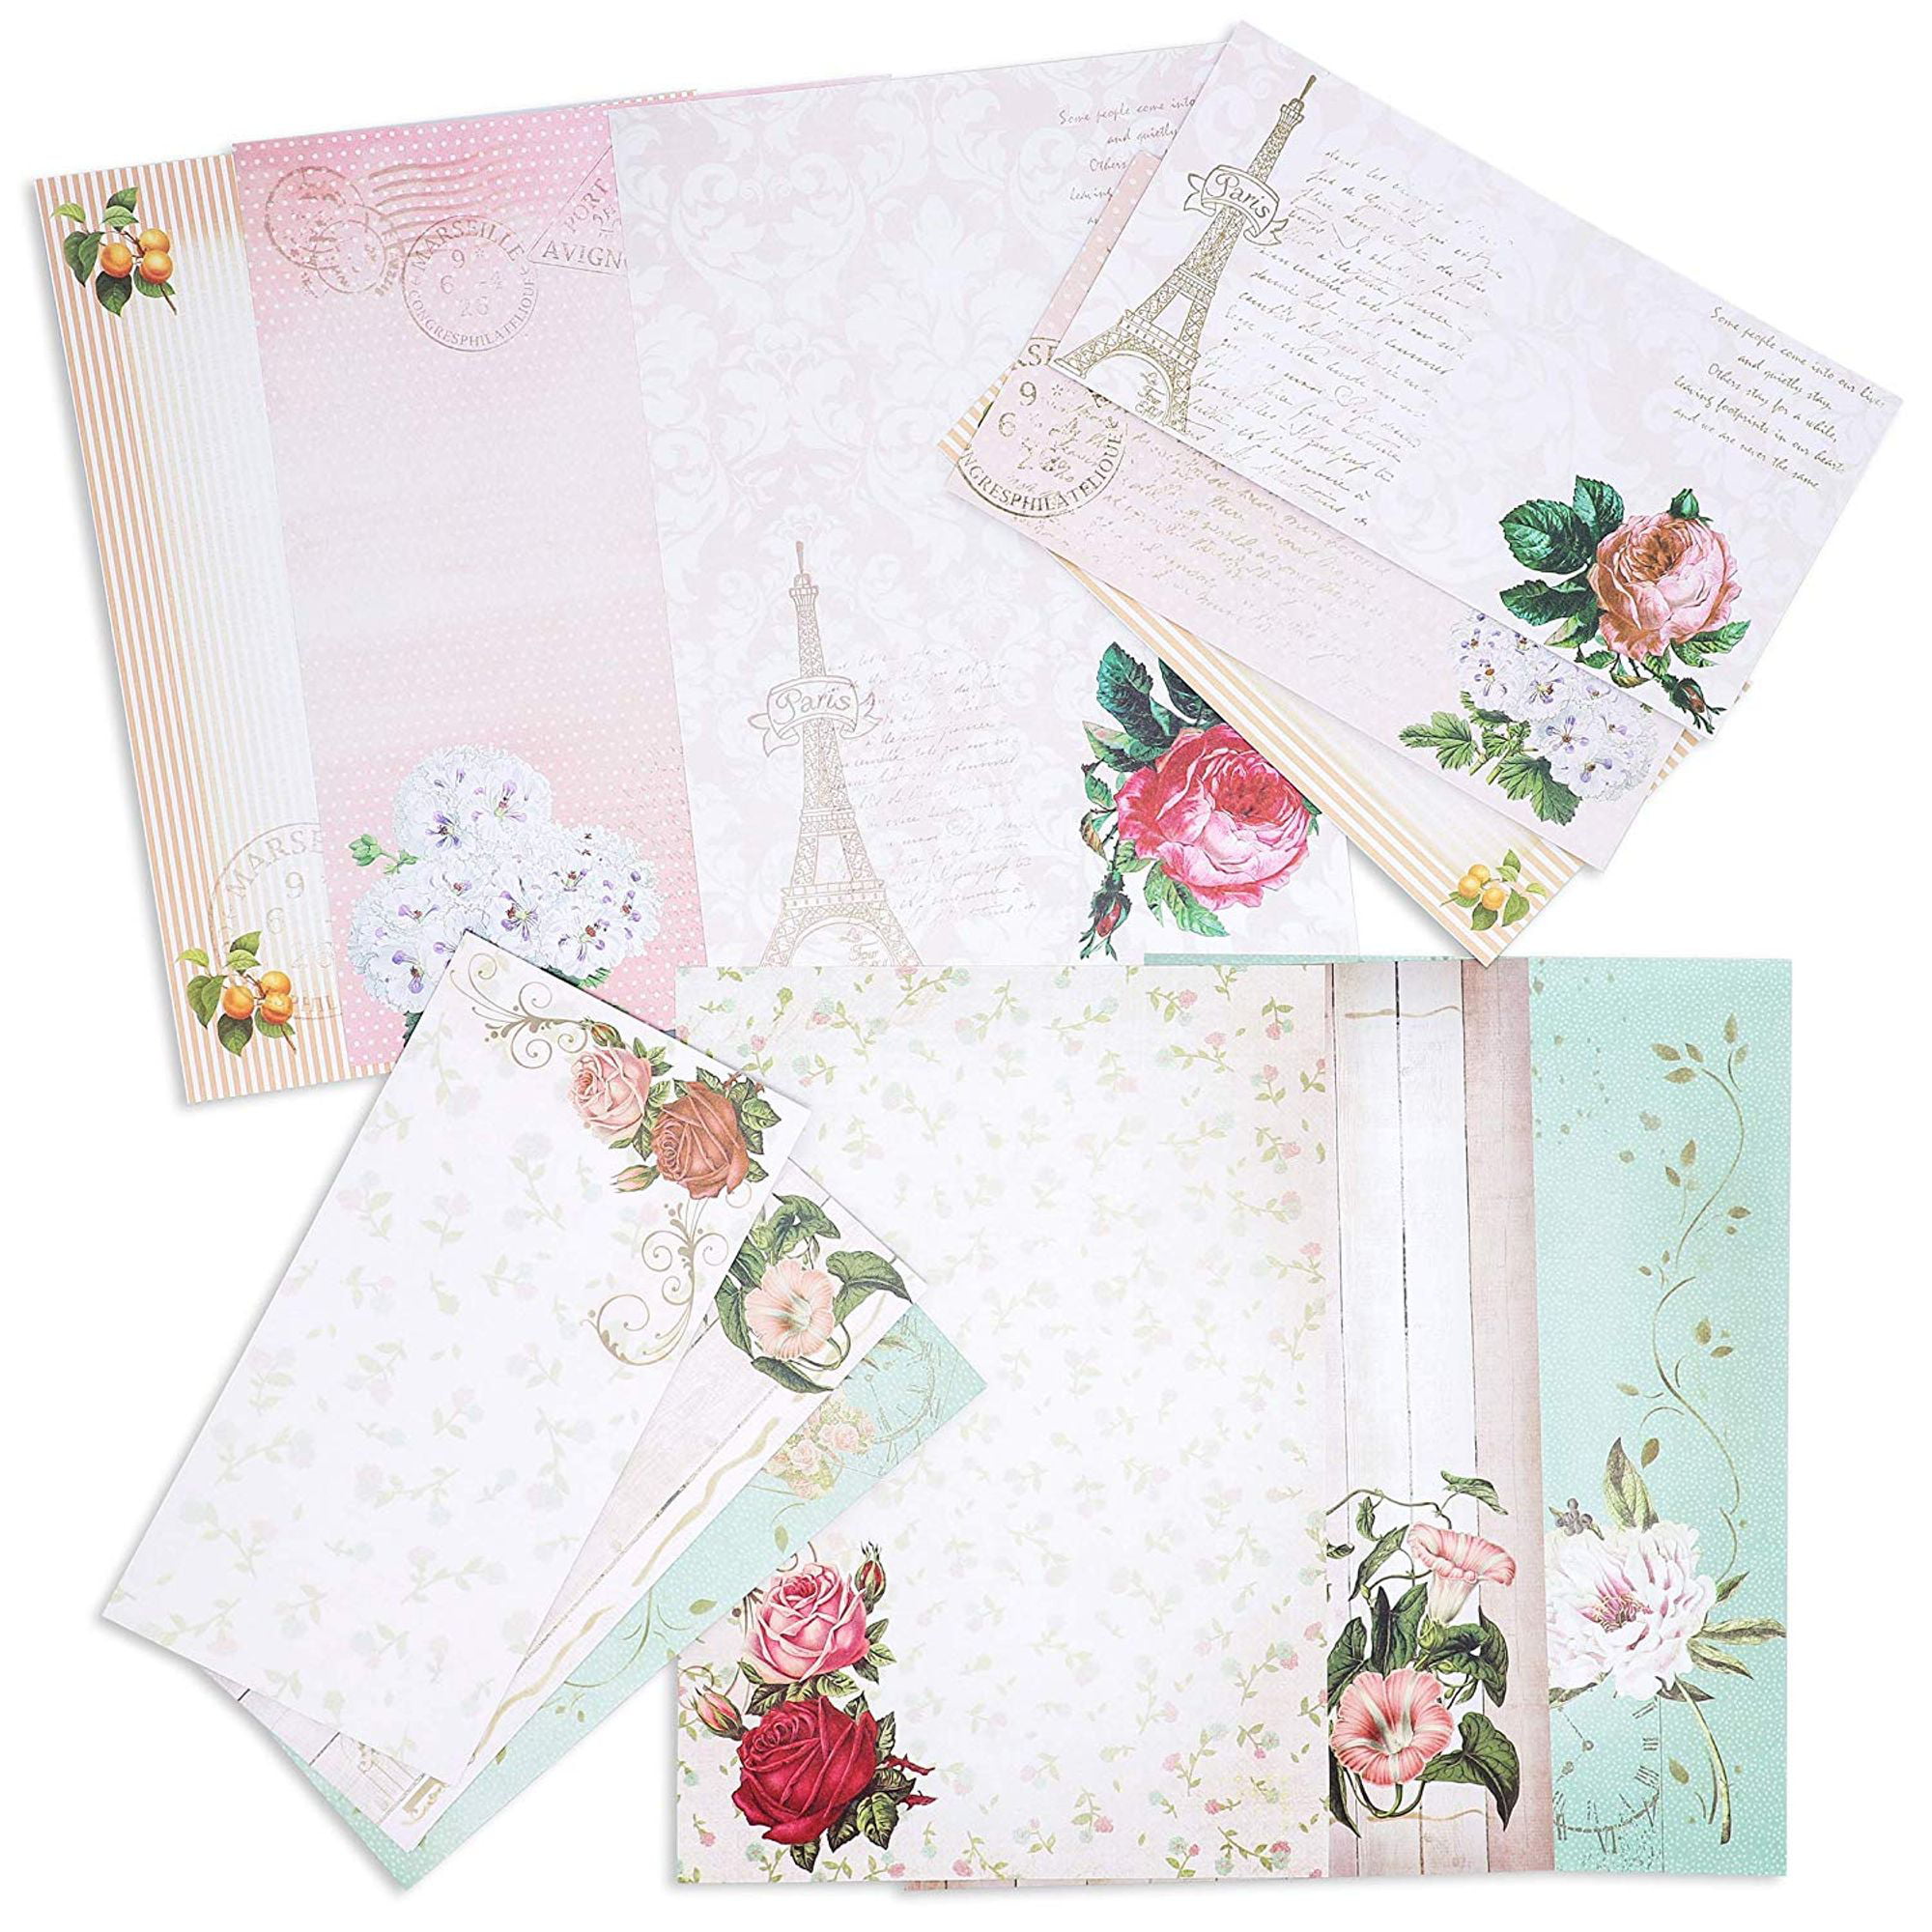 Letter Writing Supplies for School A5 Size Set of Stationery Paper Writing Love Heart Letter Writing Paper and Envelopes 10 Letters & 10 envelopes Home or Office